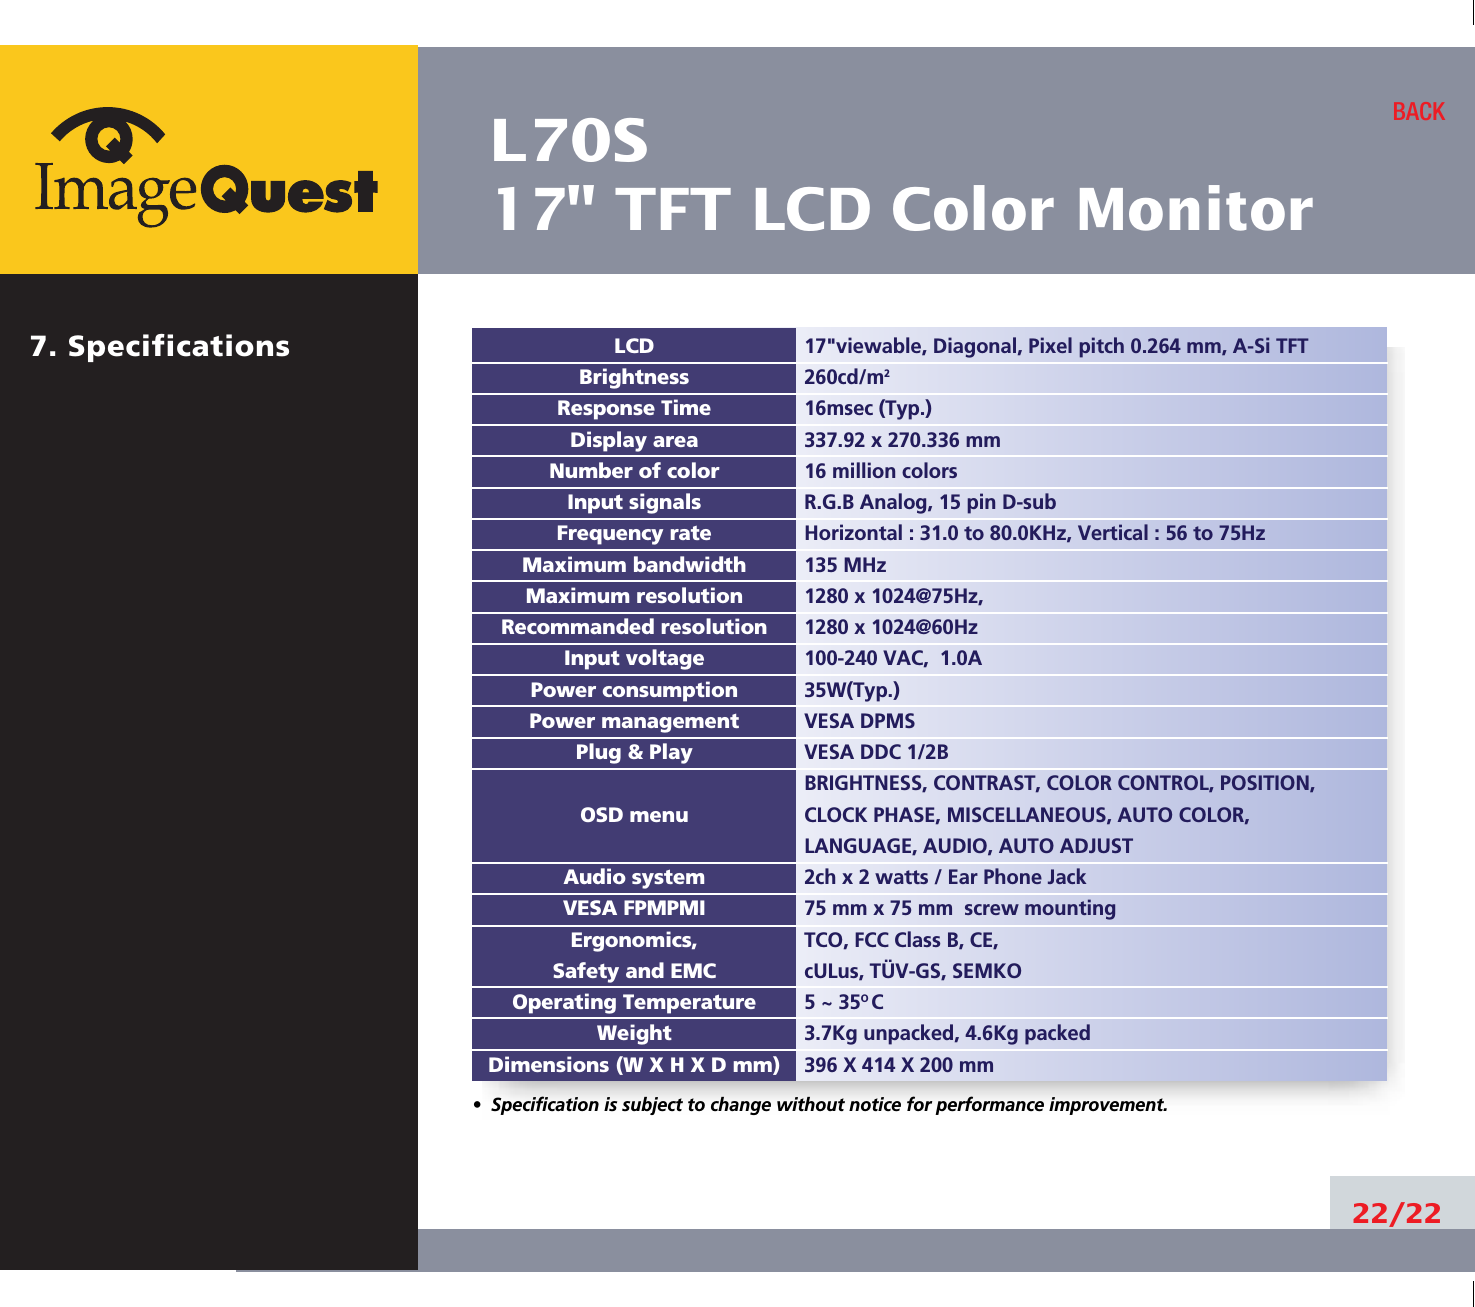 L70S17&quot; TFT LCD Color Monitor22/22BACK17&quot;viewable, Diagonal, Pixel pitch 0.264 mm, A-Si TFT260cd/m216msec (Typ.)337.92 x 270.336 mm16 million colorsR.G.B Analog, 15 pin D-subHorizontal : 31.0 to 80.0KHz, Vertical : 56 to 75Hz135 MHz1280 x 1024@75Hz, 1280 x 1024@60Hz100-240 VAC,  1.0A35W(Typ.)VESA DPMSVESA DDC 1/2BBRIGHTNESS, CONTRAST, COLOR CONTROL, POSITION, CLOCK PHASE, MISCELLANEOUS, AUTO COLOR, LANGUAGE, AUDIO, AUTO ADJUST2ch x 2 watts / Ear Phone Jack75 mm x 75 mm  screw mountingTCO, FCC Class B, CE,cULus, TÜV-GS, SEMKO5 ~ 35O C3.7Kg unpacked, 4.6Kg packed396 X 414 X 200 mmLCDBrightnessResponse TimeDisplay areaNumber of colorInput signalsFrequency rateMaximum bandwidthMaximum resolutionRecommanded resolutionInput voltagePower consumptionPower managementPlug &amp; PlayOSD menuAudio systemVESA FPMPMIErgonomics,Safety and EMCOperating TemperatureWeightDimensions (W X H X D mm)•  Specification is subject to change without notice for performance improvement.7. Specifications